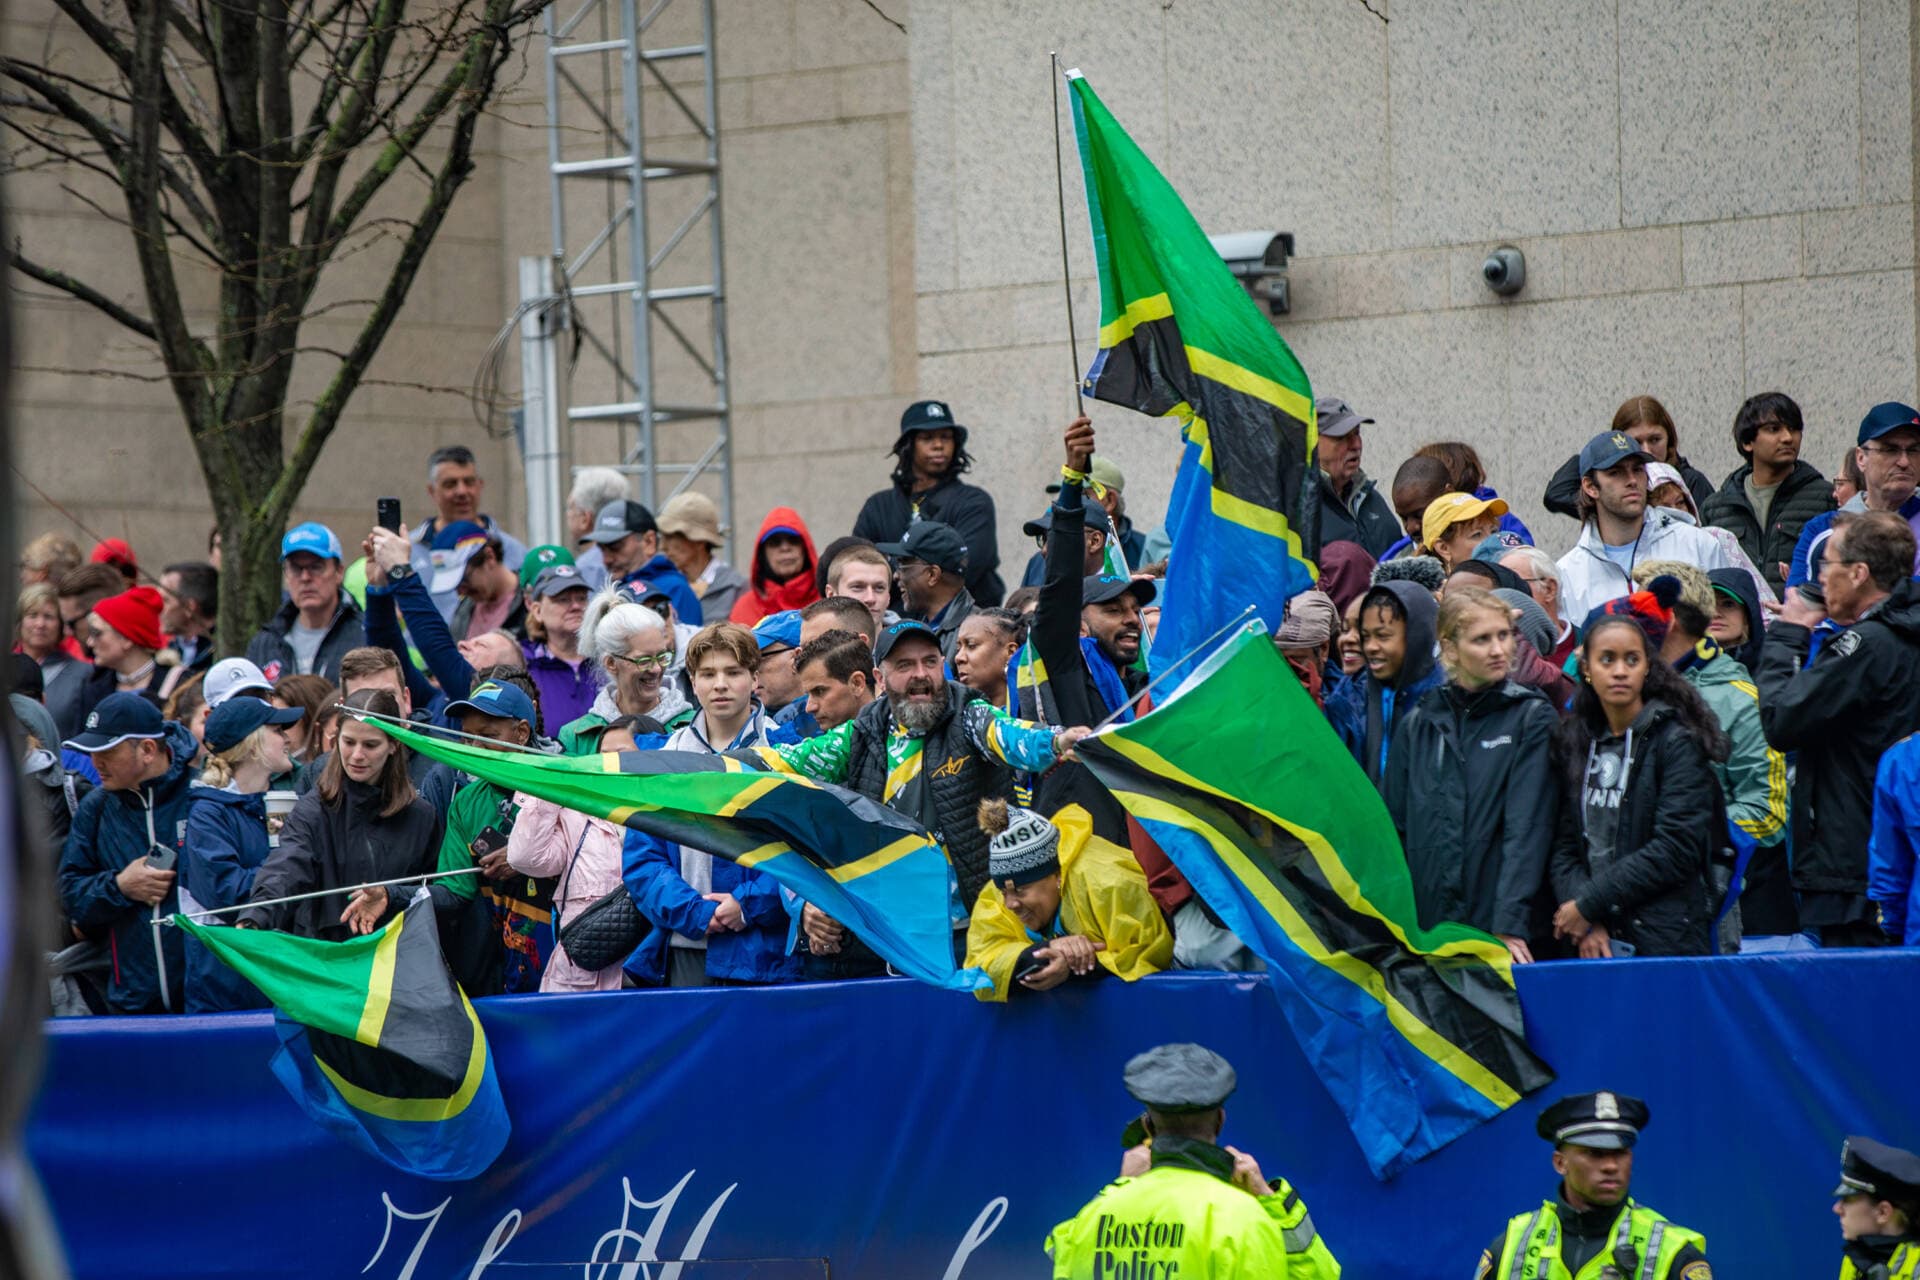 Spectators in the grandstand wave Tanzanian flags as the elite men’s racers approach the finish line on Boylston Street. (Jesse Costa/WBUR)